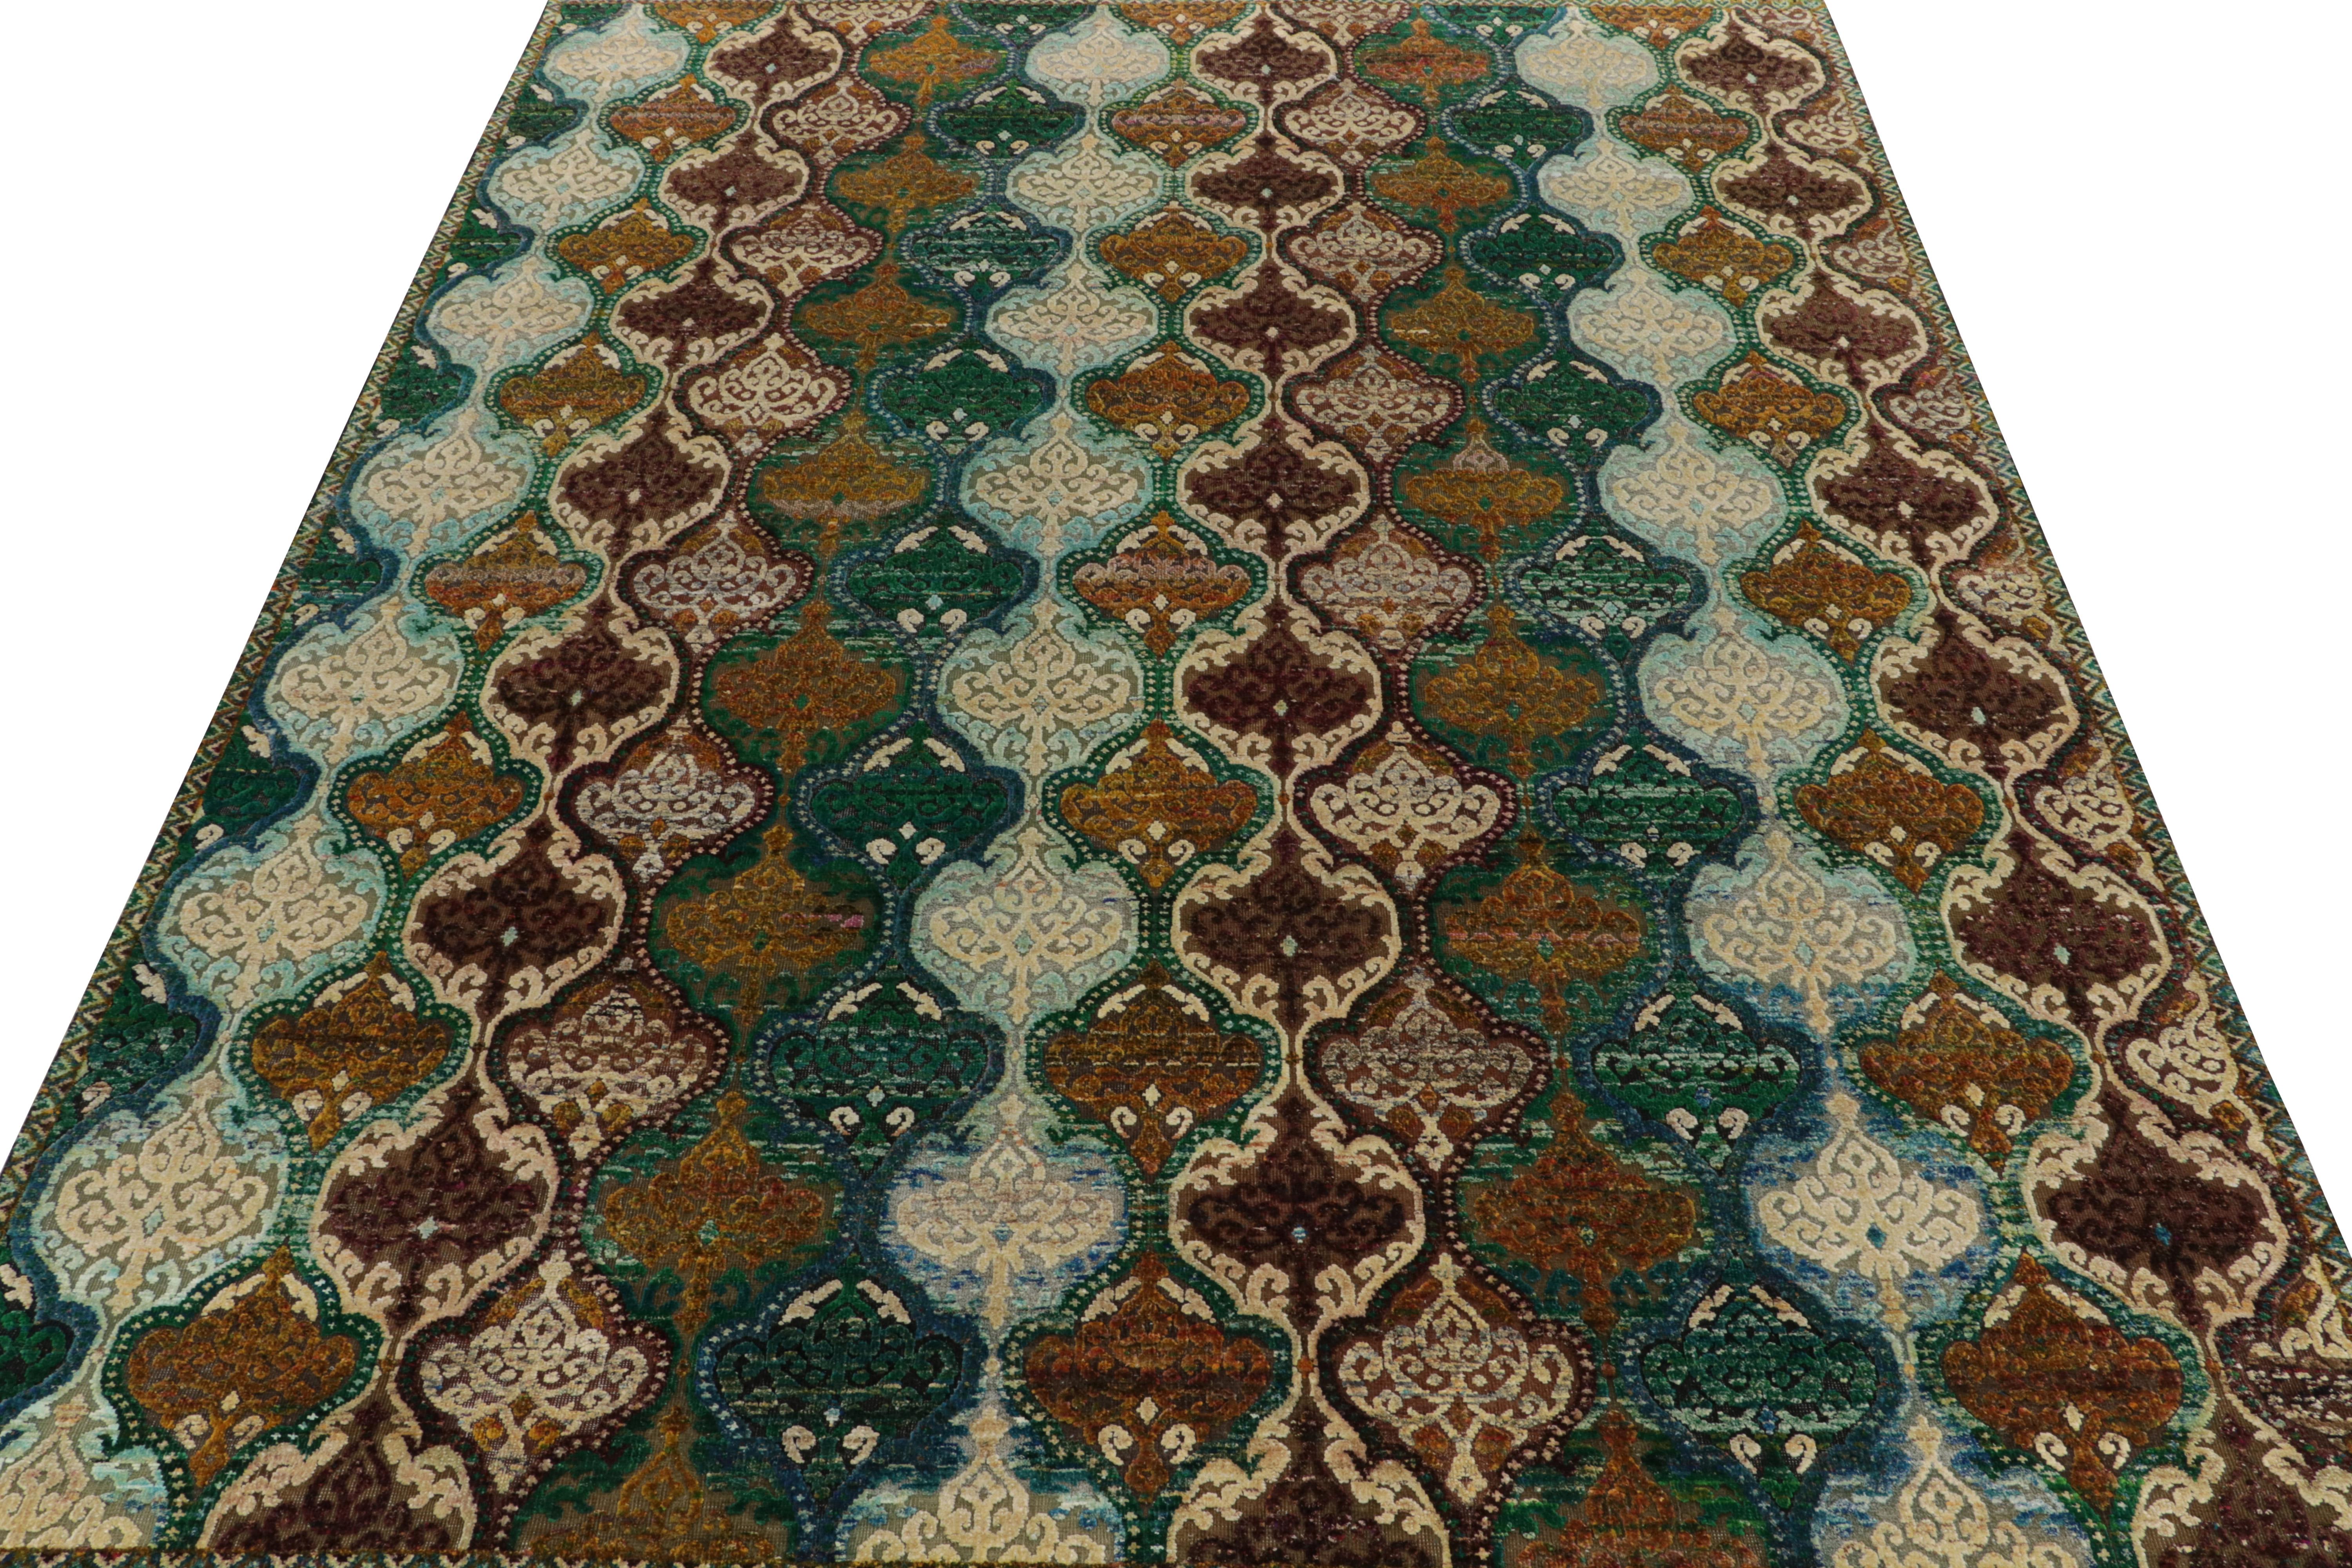 Indian Rug & Kilim’s Classic Style Rug in Green, Gold and White Crest Patterns For Sale